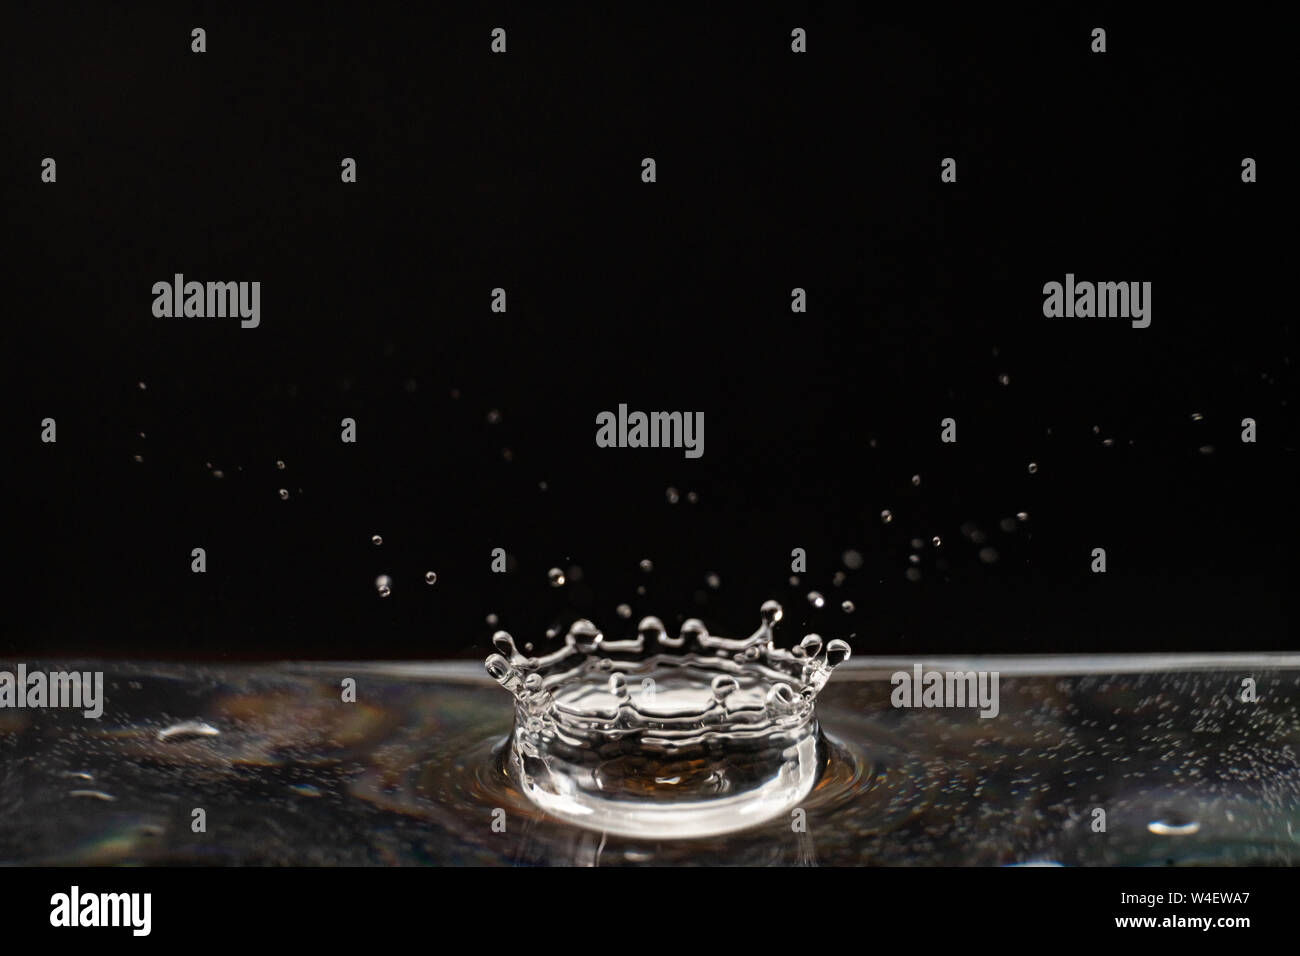 https://c8.alamy.com/comp/W4EWA7/drop-of-water-transparent-water-drop-water-splash-close-up-isolated-on-black-background-a-lot-of-bubbles-liquid-motion-W4EWA7.jpg